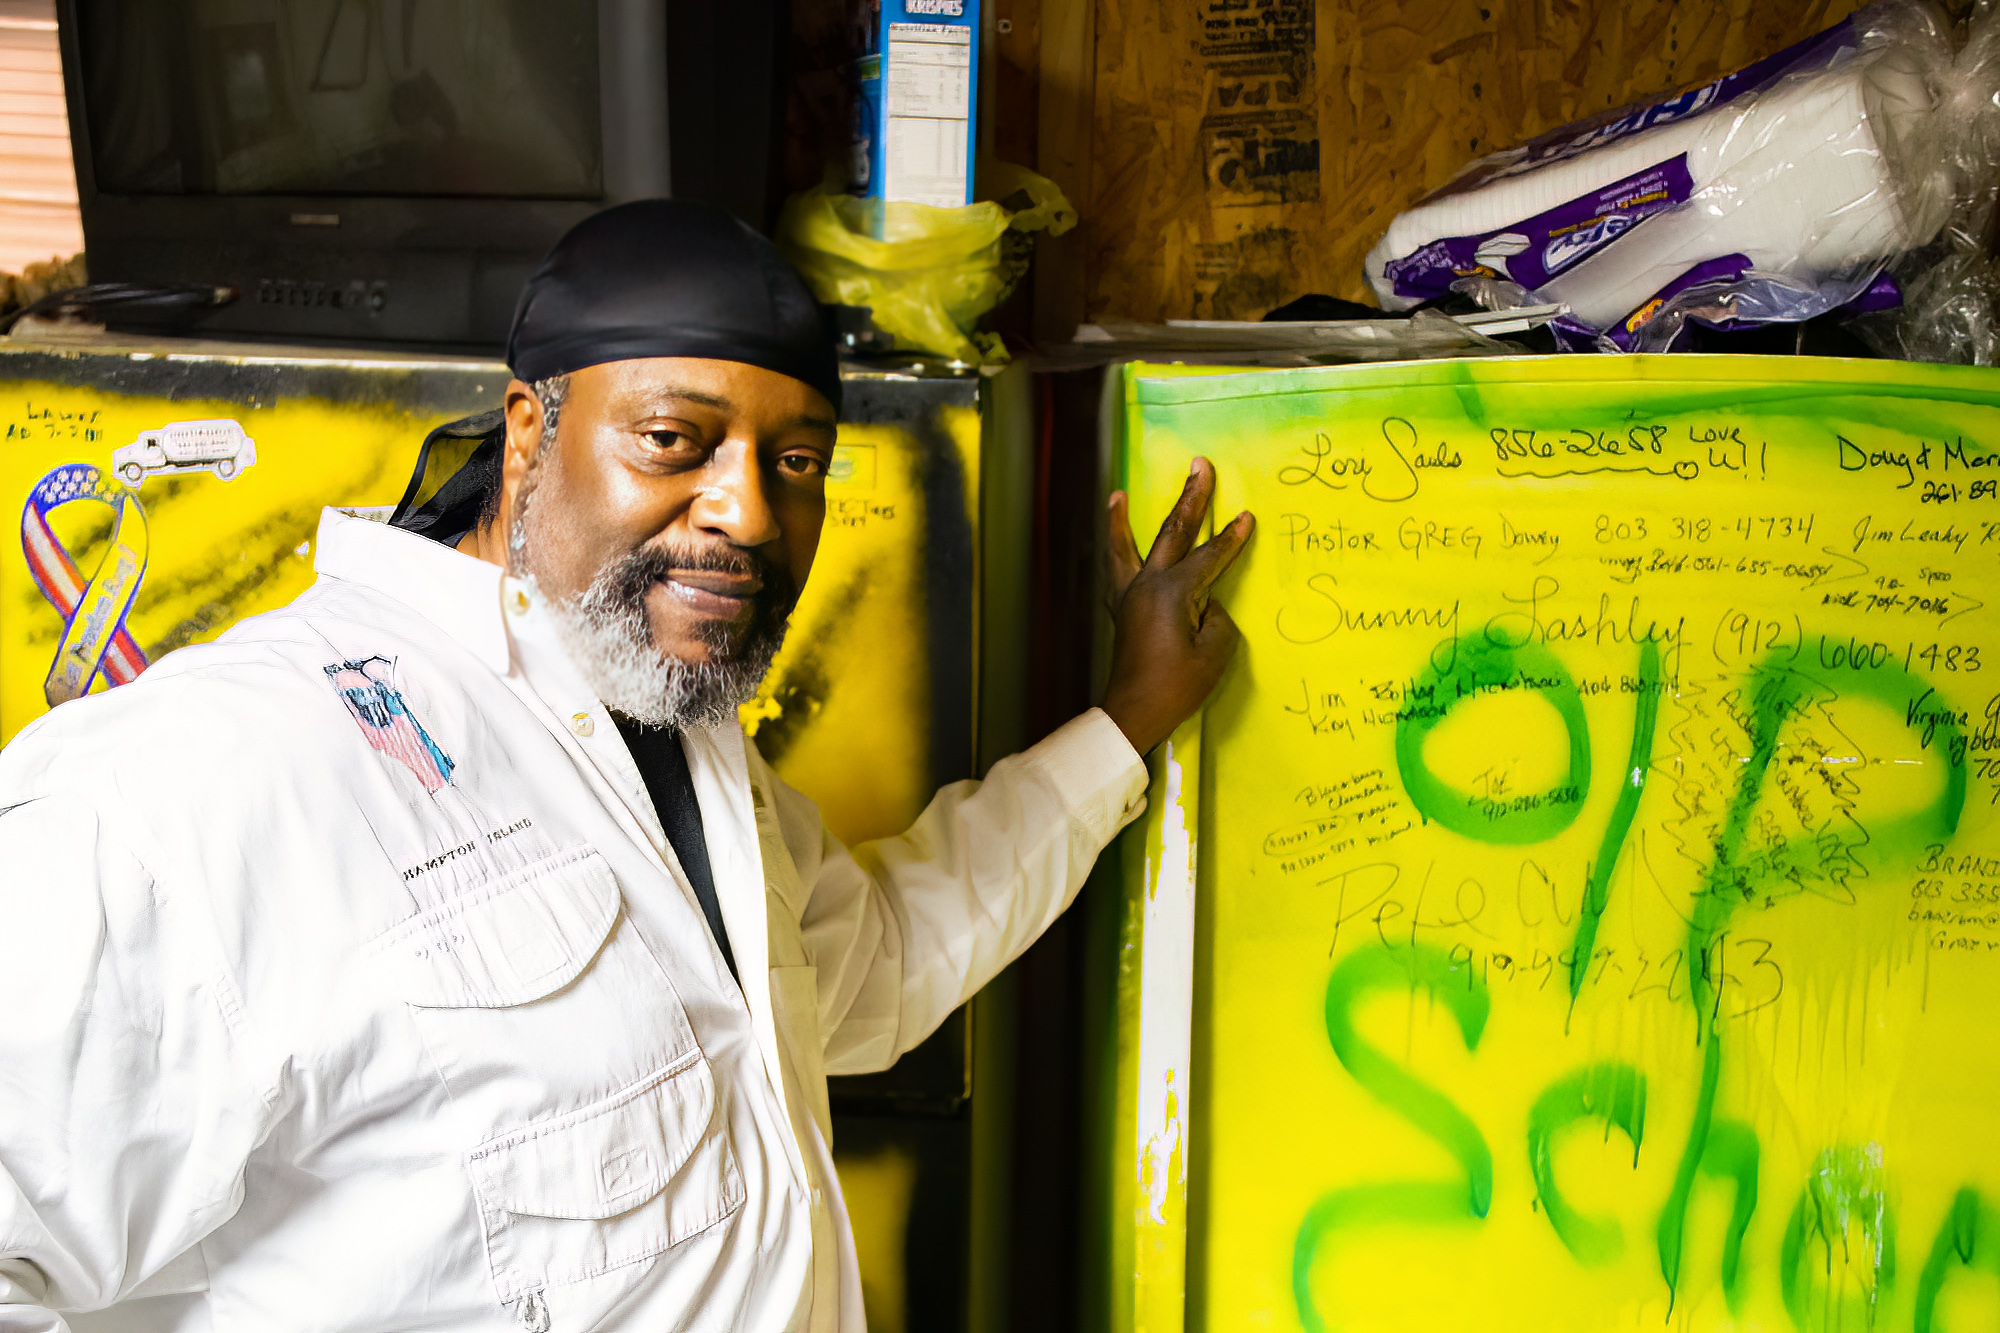 Chef Jerome at the Old School Diner near Savannah